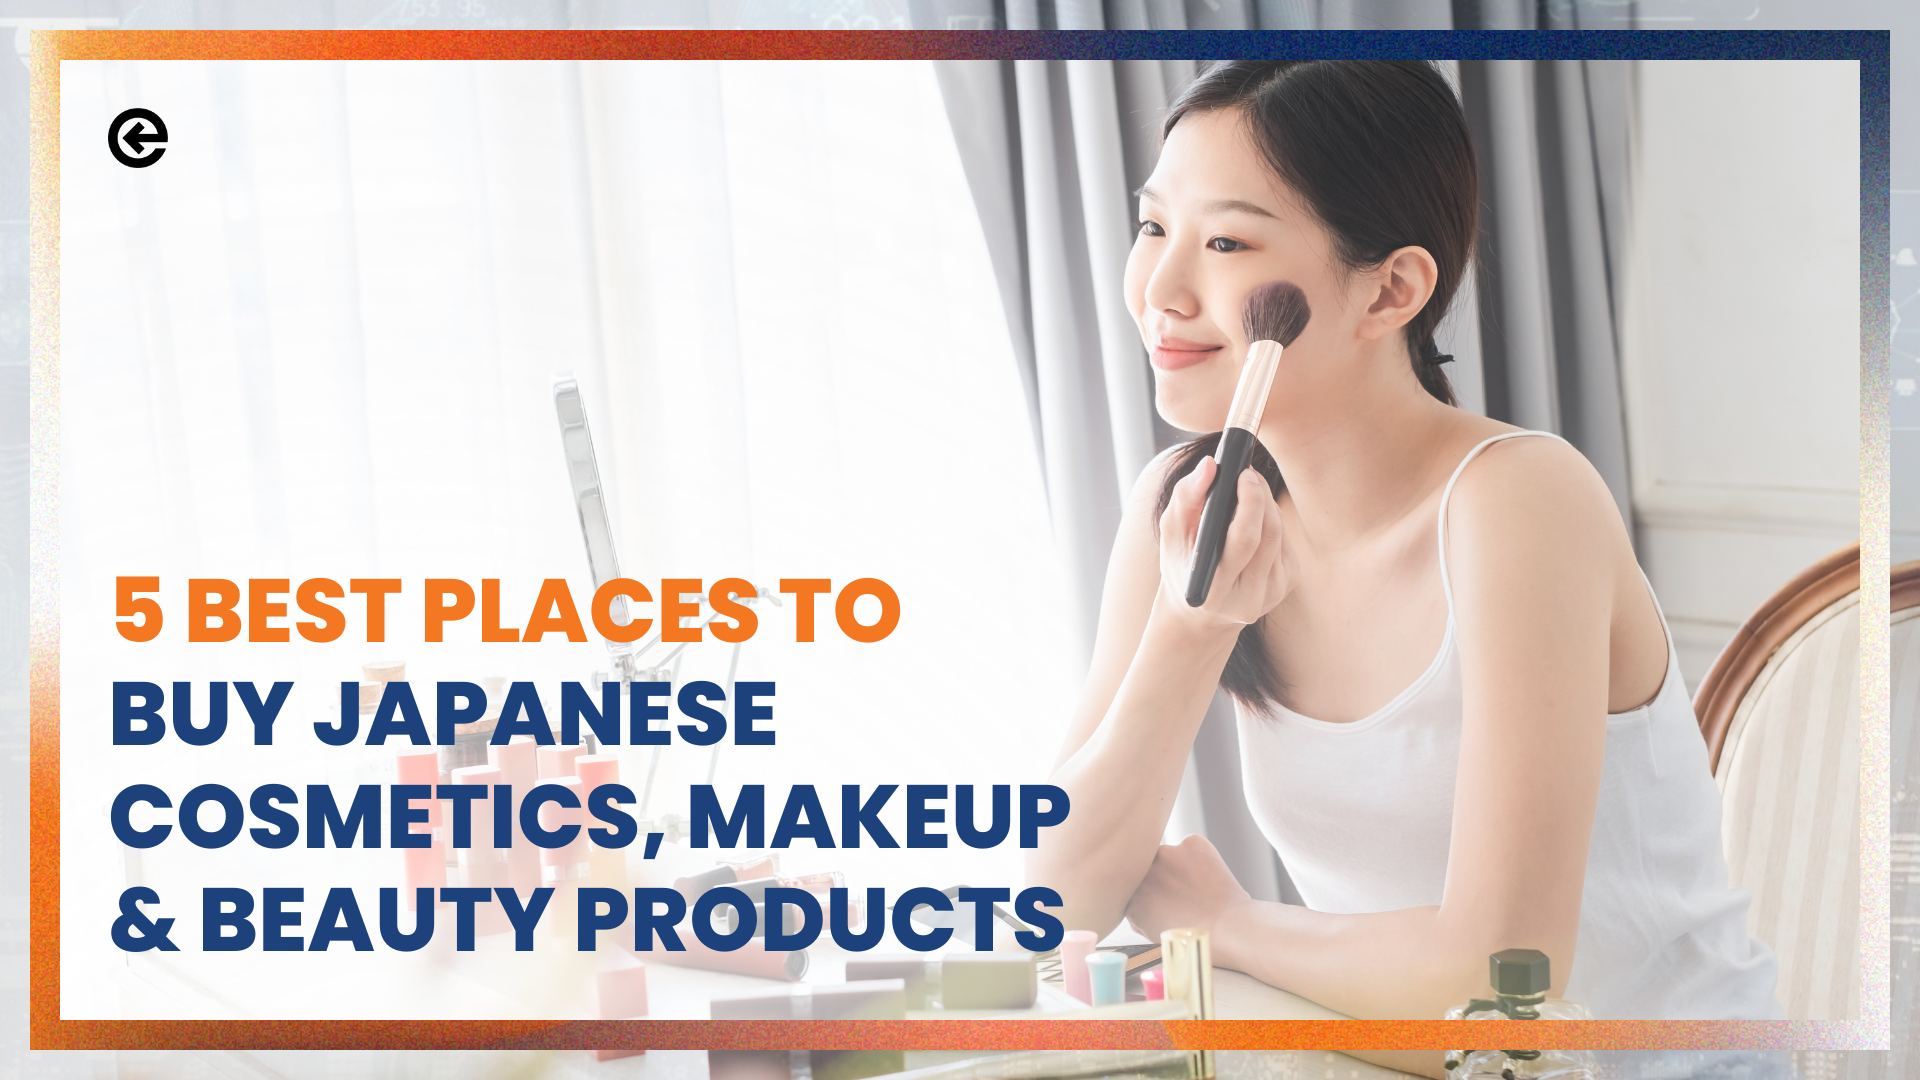 5 Best Places to Buy Japanese Cosmetics, Makeup and Beauty Products